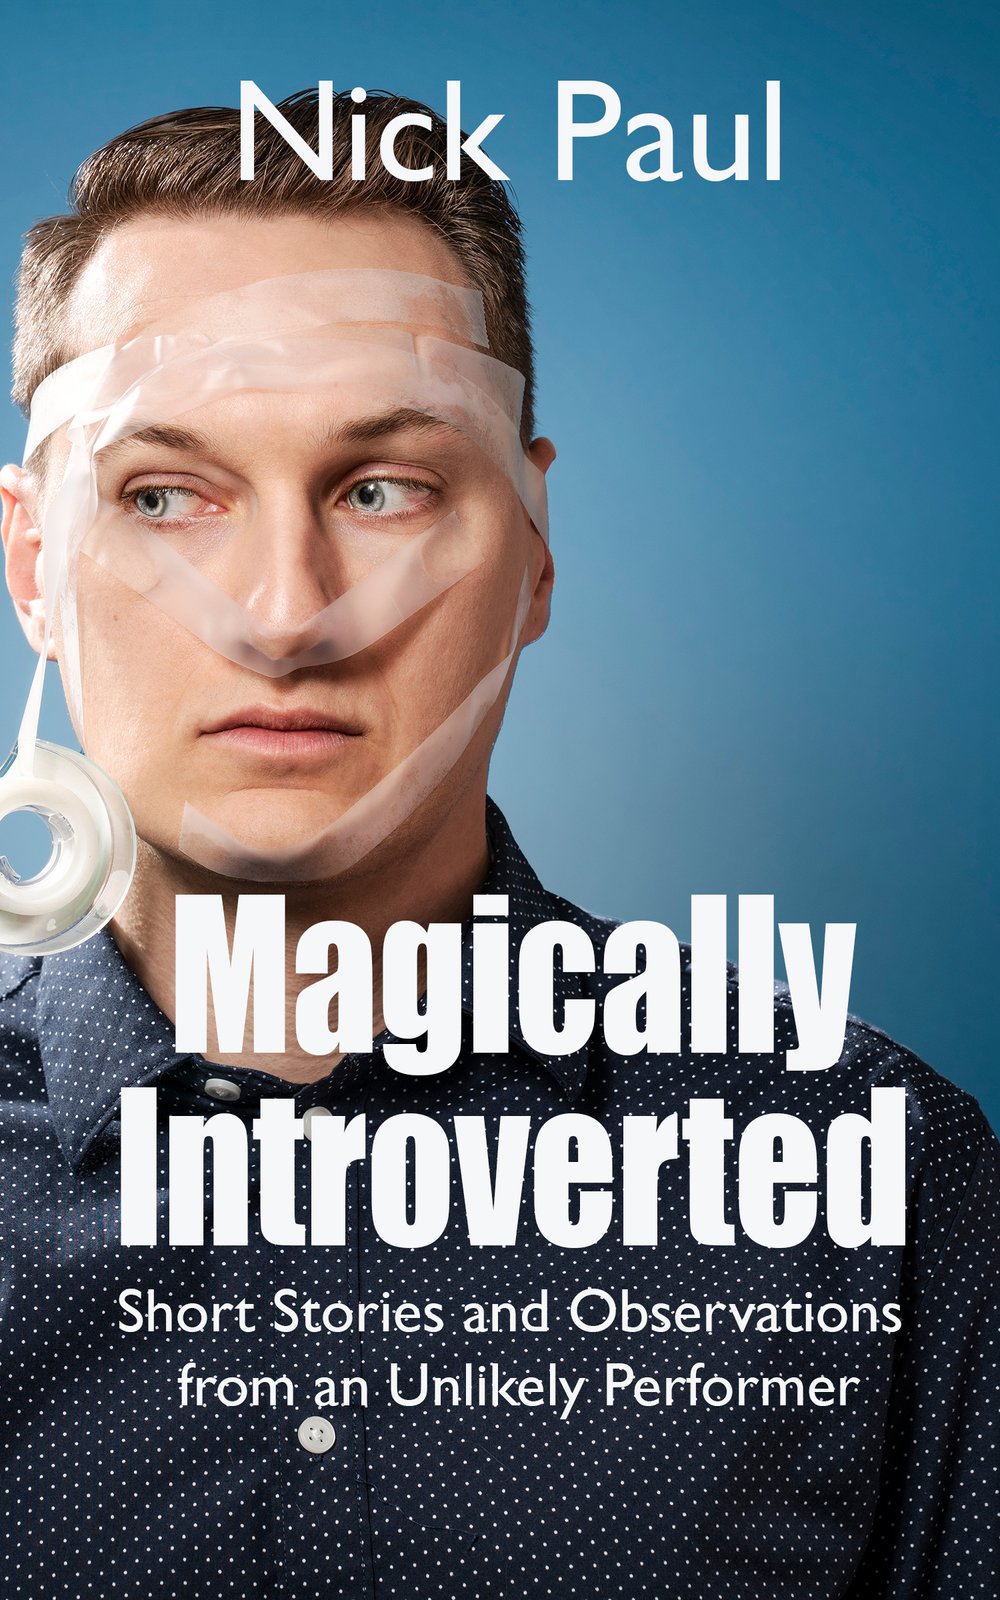 "Magically Introverted" Signed Copy